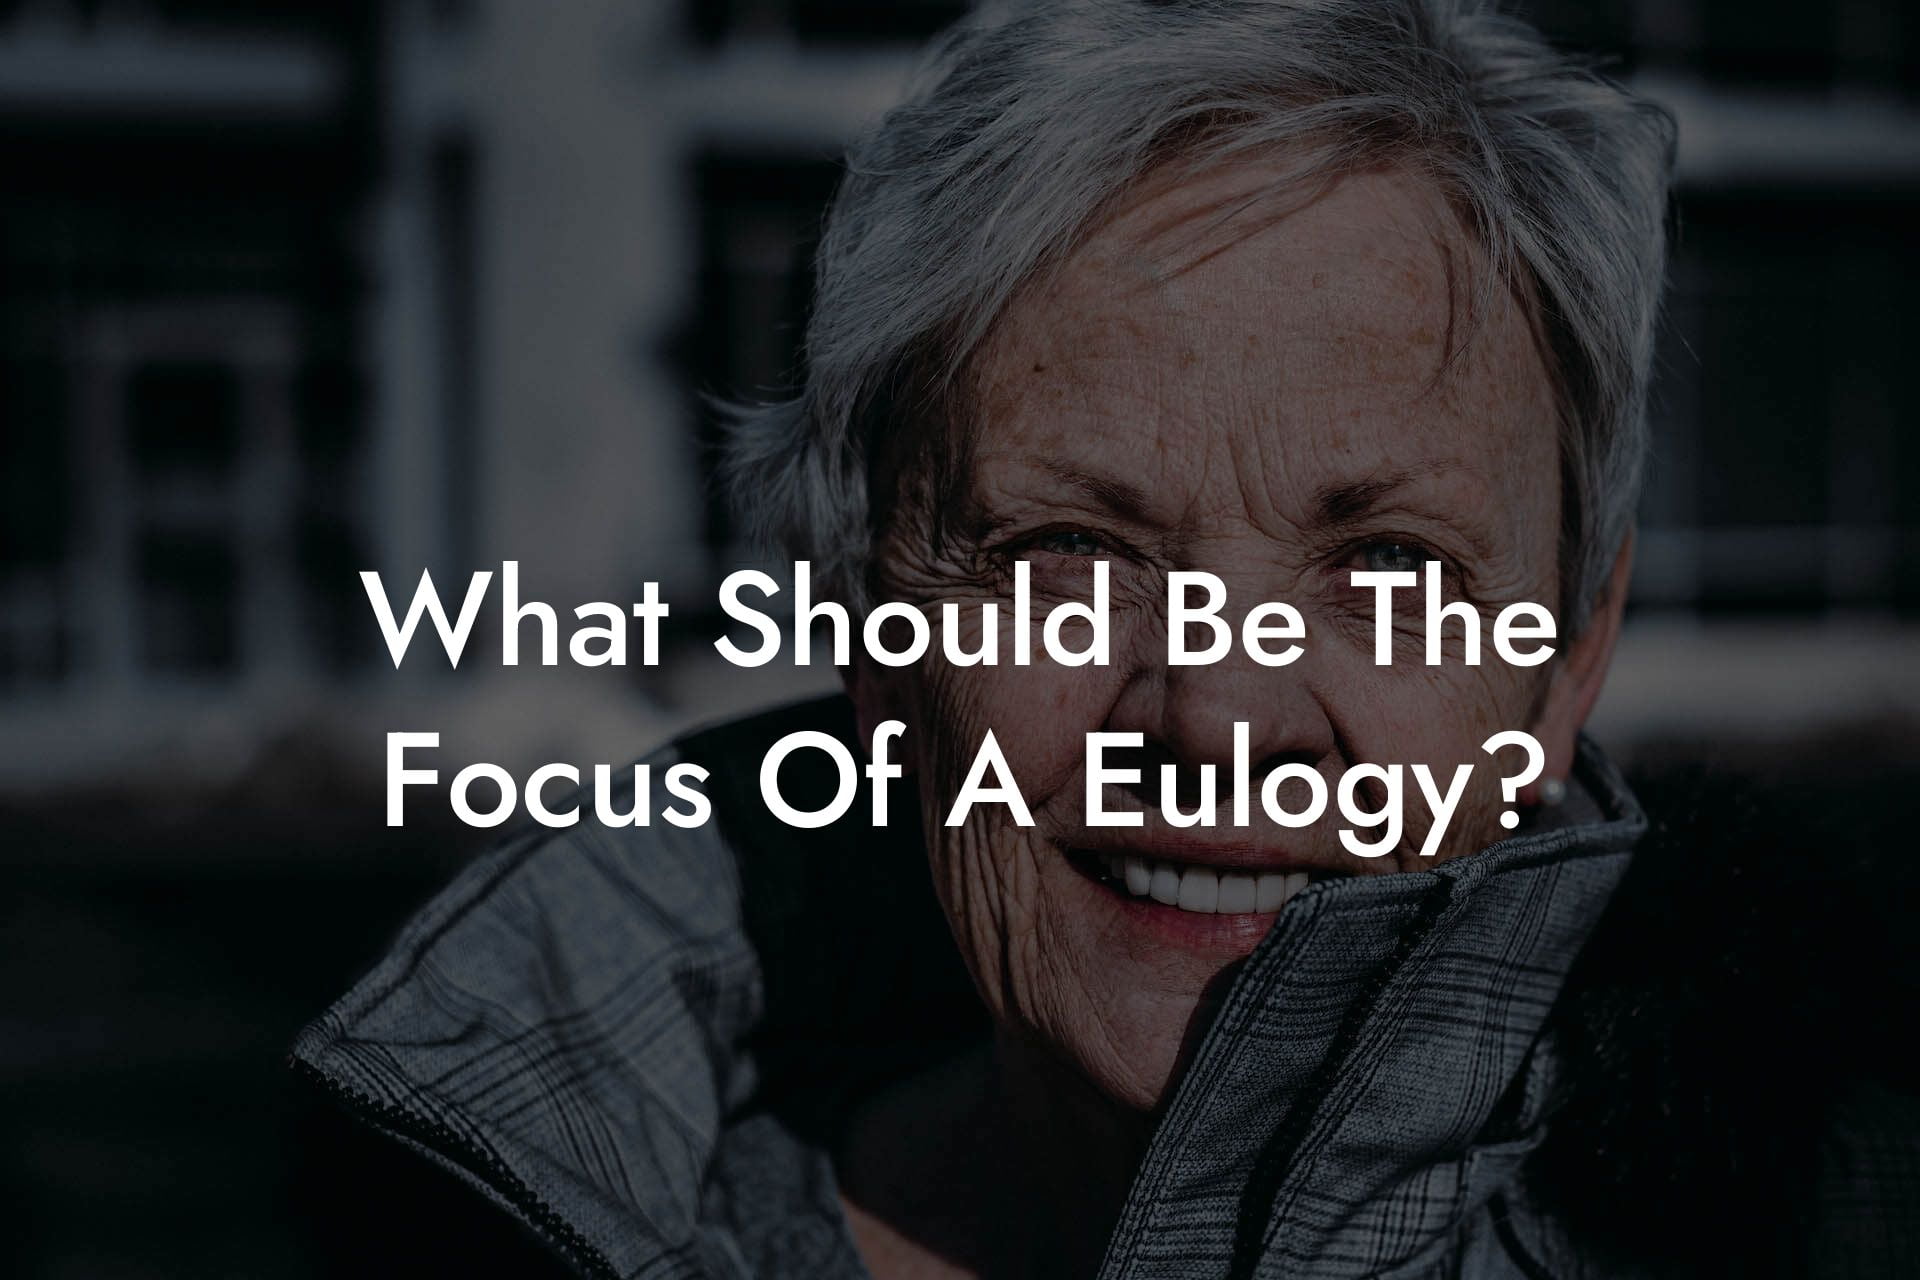 What Should Be The Focus Of A Eulogy?